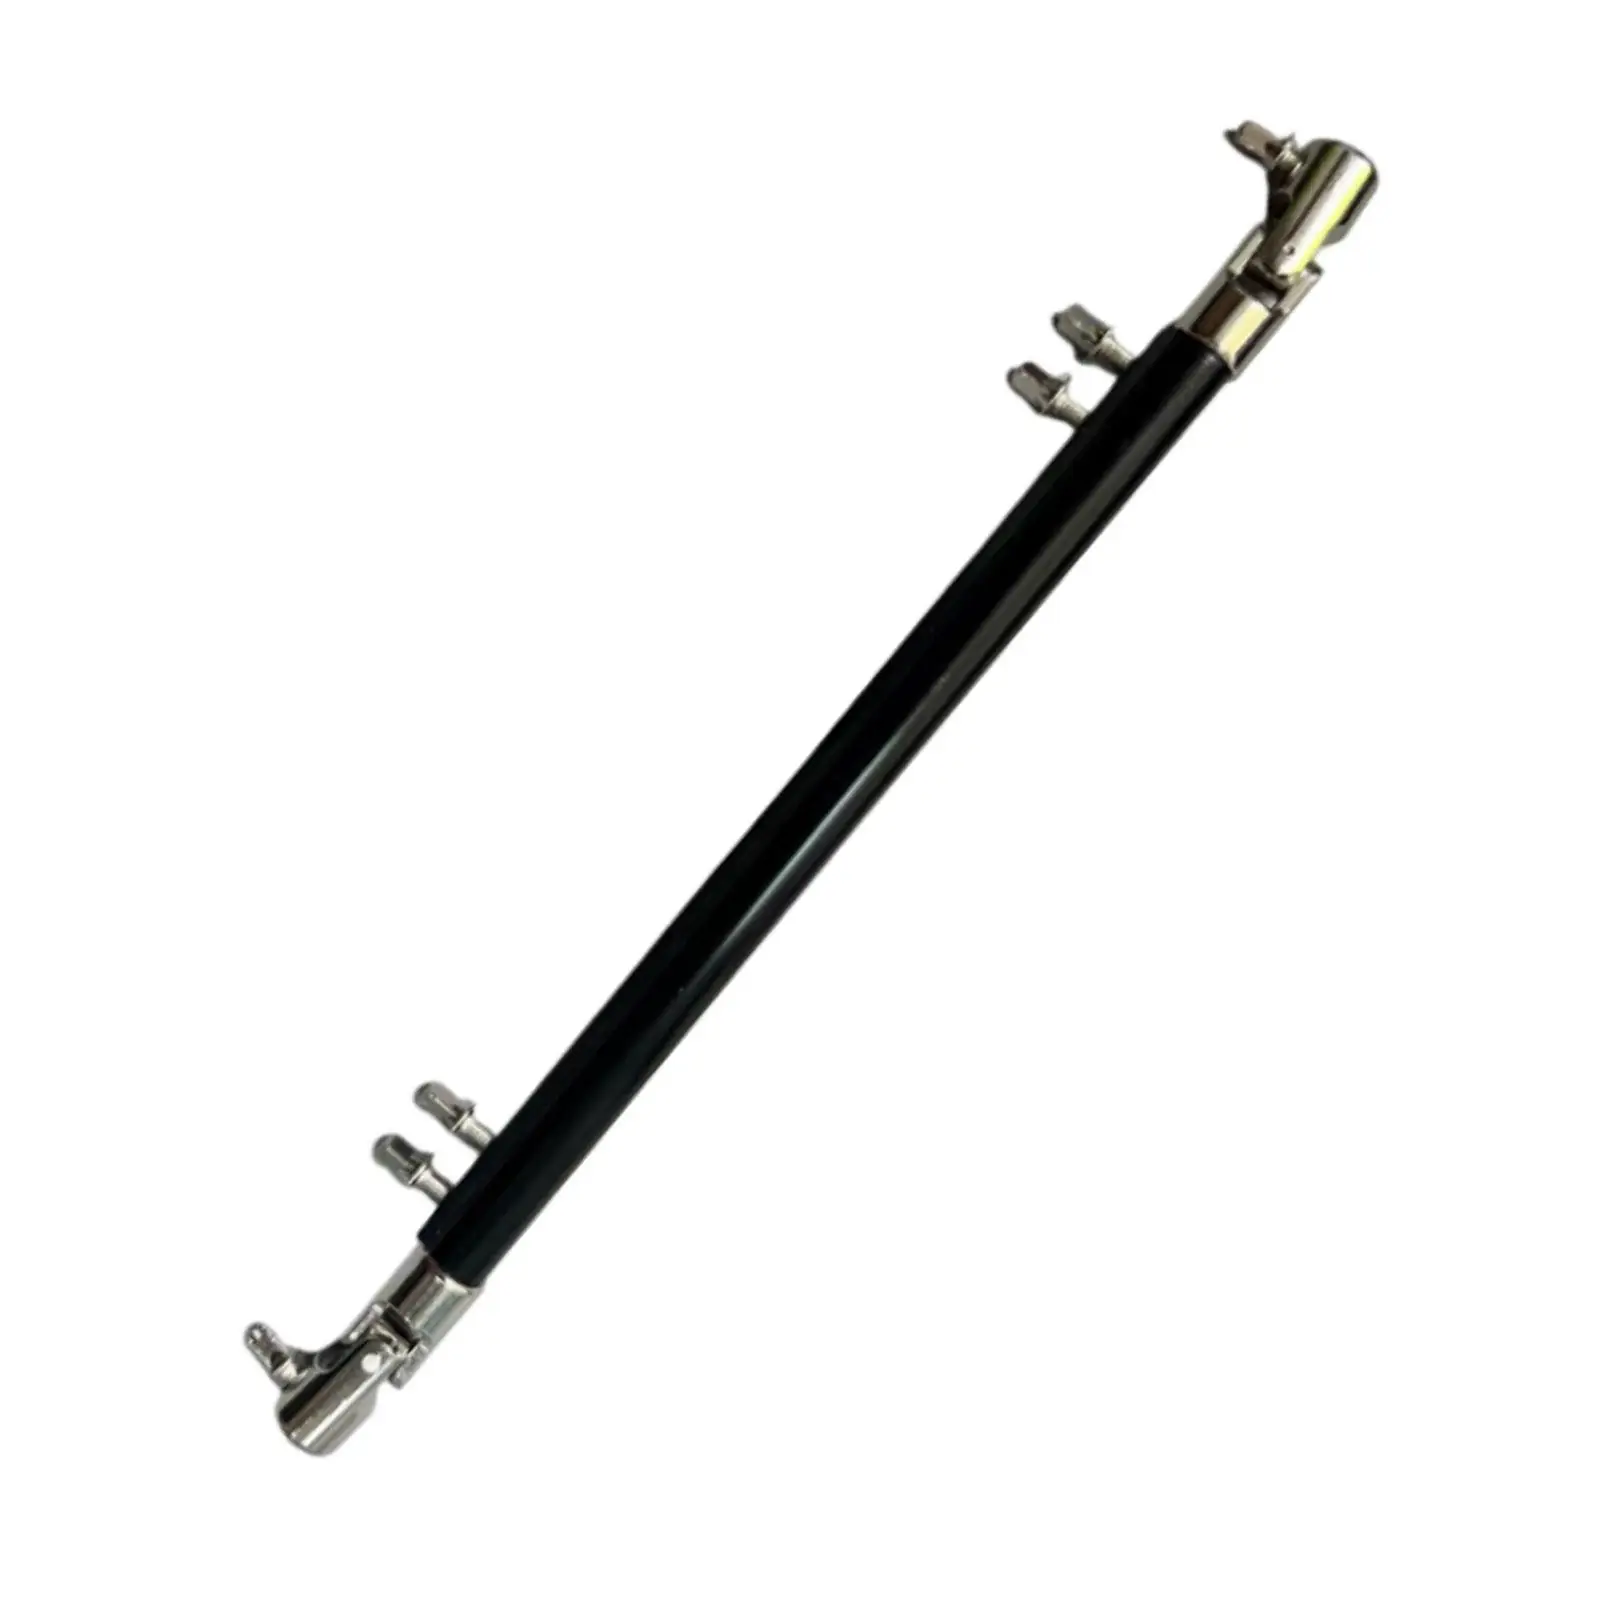 Double Foot Pedal Drive Shaft Rod Replacement Tight 13.82`` Double Drum Pedal Link Bar for Exercise Percussion Instrument Parts